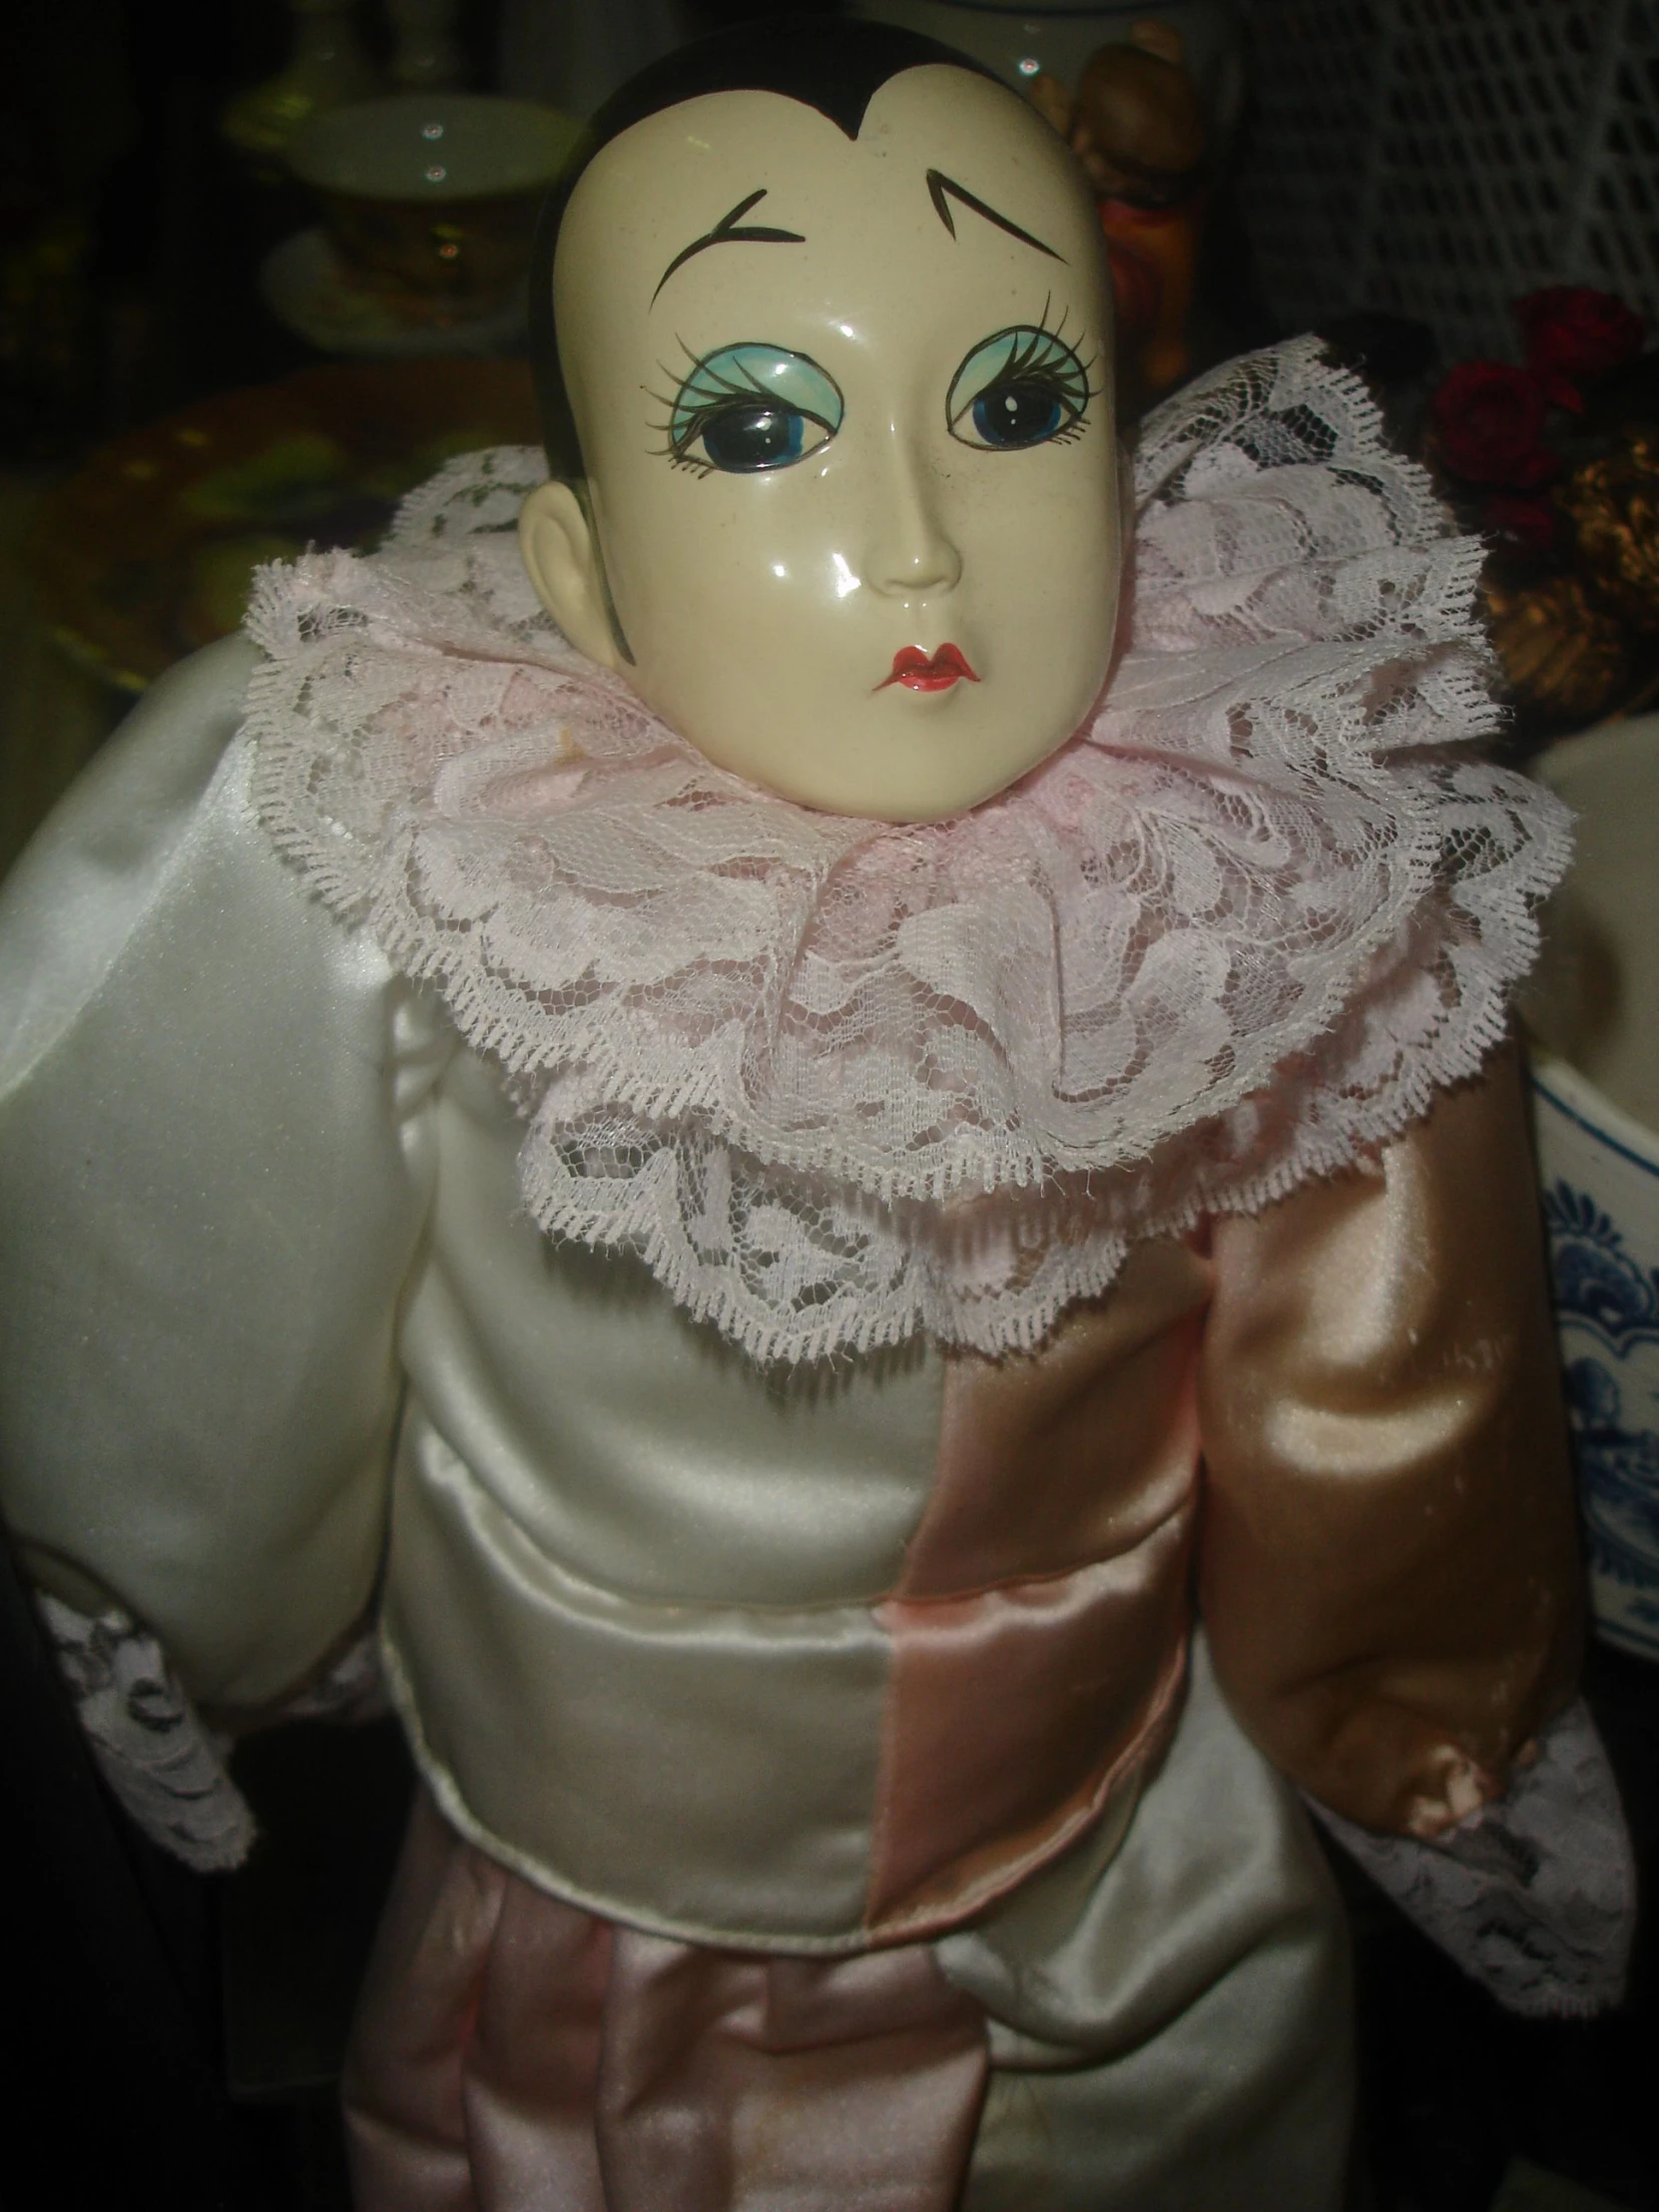 there is a doll with a bonnet in the po